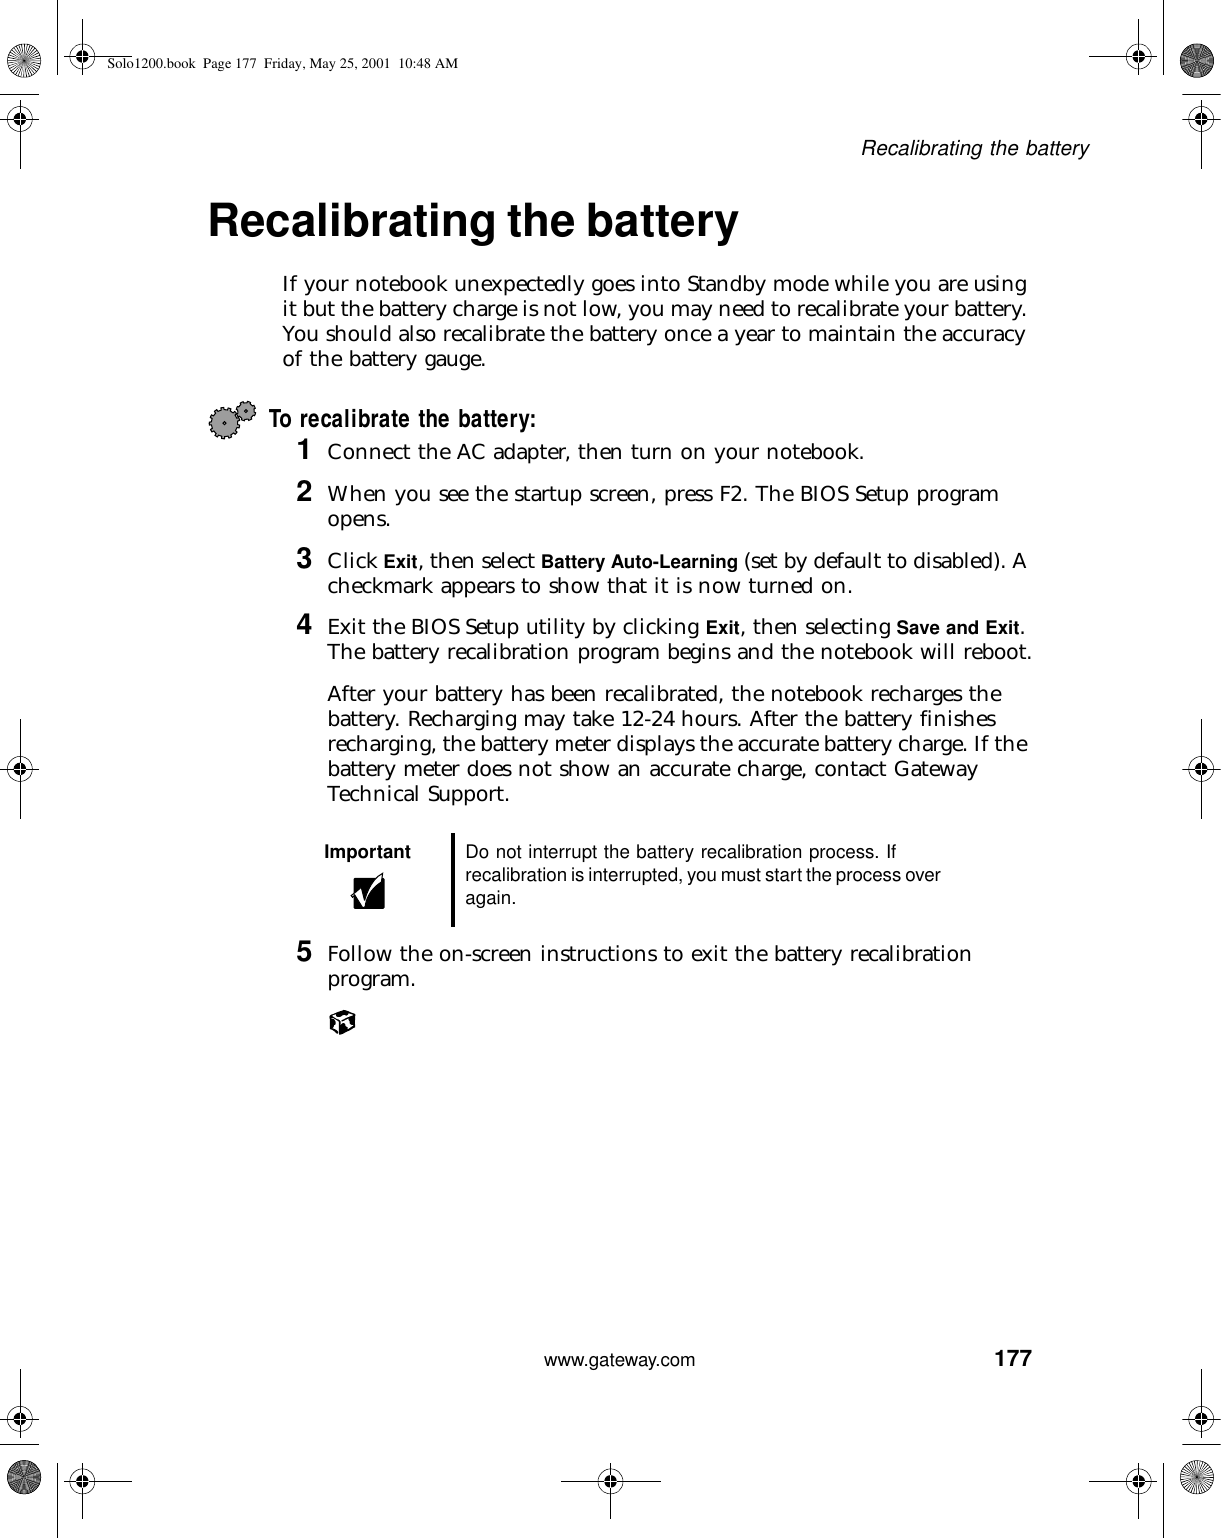 177Recalibrating the batterywww.gateway.comRecalibrating the battery If your notebook unexpectedly goes into Standby mode while you are using it but the battery charge is not low, you may need to recalibrate your battery. You should also recalibrate the battery once a year to maintain the accuracy of the battery gauge.To recalibrate the battery:1Connect the AC adapter, then turn on your notebook.2When you see the startup screen, press F2. The BIOS Setup program opens.3Click Exit, then select Battery Auto-Learning (set by default to disabled). A checkmark appears to show that it is now turned on.4Exit the BIOS Setup utility by clicking Exit, then selecting Save and Exit. The battery recalibration program begins and the notebook will reboot.After your battery has been recalibrated, the notebook recharges the battery. Recharging may take 12-24 hours. After the battery finishes recharging, the battery meter displays the accurate battery charge. If the battery meter does not show an accurate charge, contact Gateway Technical Support.5Follow the on-screen instructions to exit the battery recalibration program.Important Do not interrupt the battery recalibration process. If recalibration is interrupted, you must start the process over again.Solo1200.book Page 177 Friday, May 25, 2001 10:48 AM